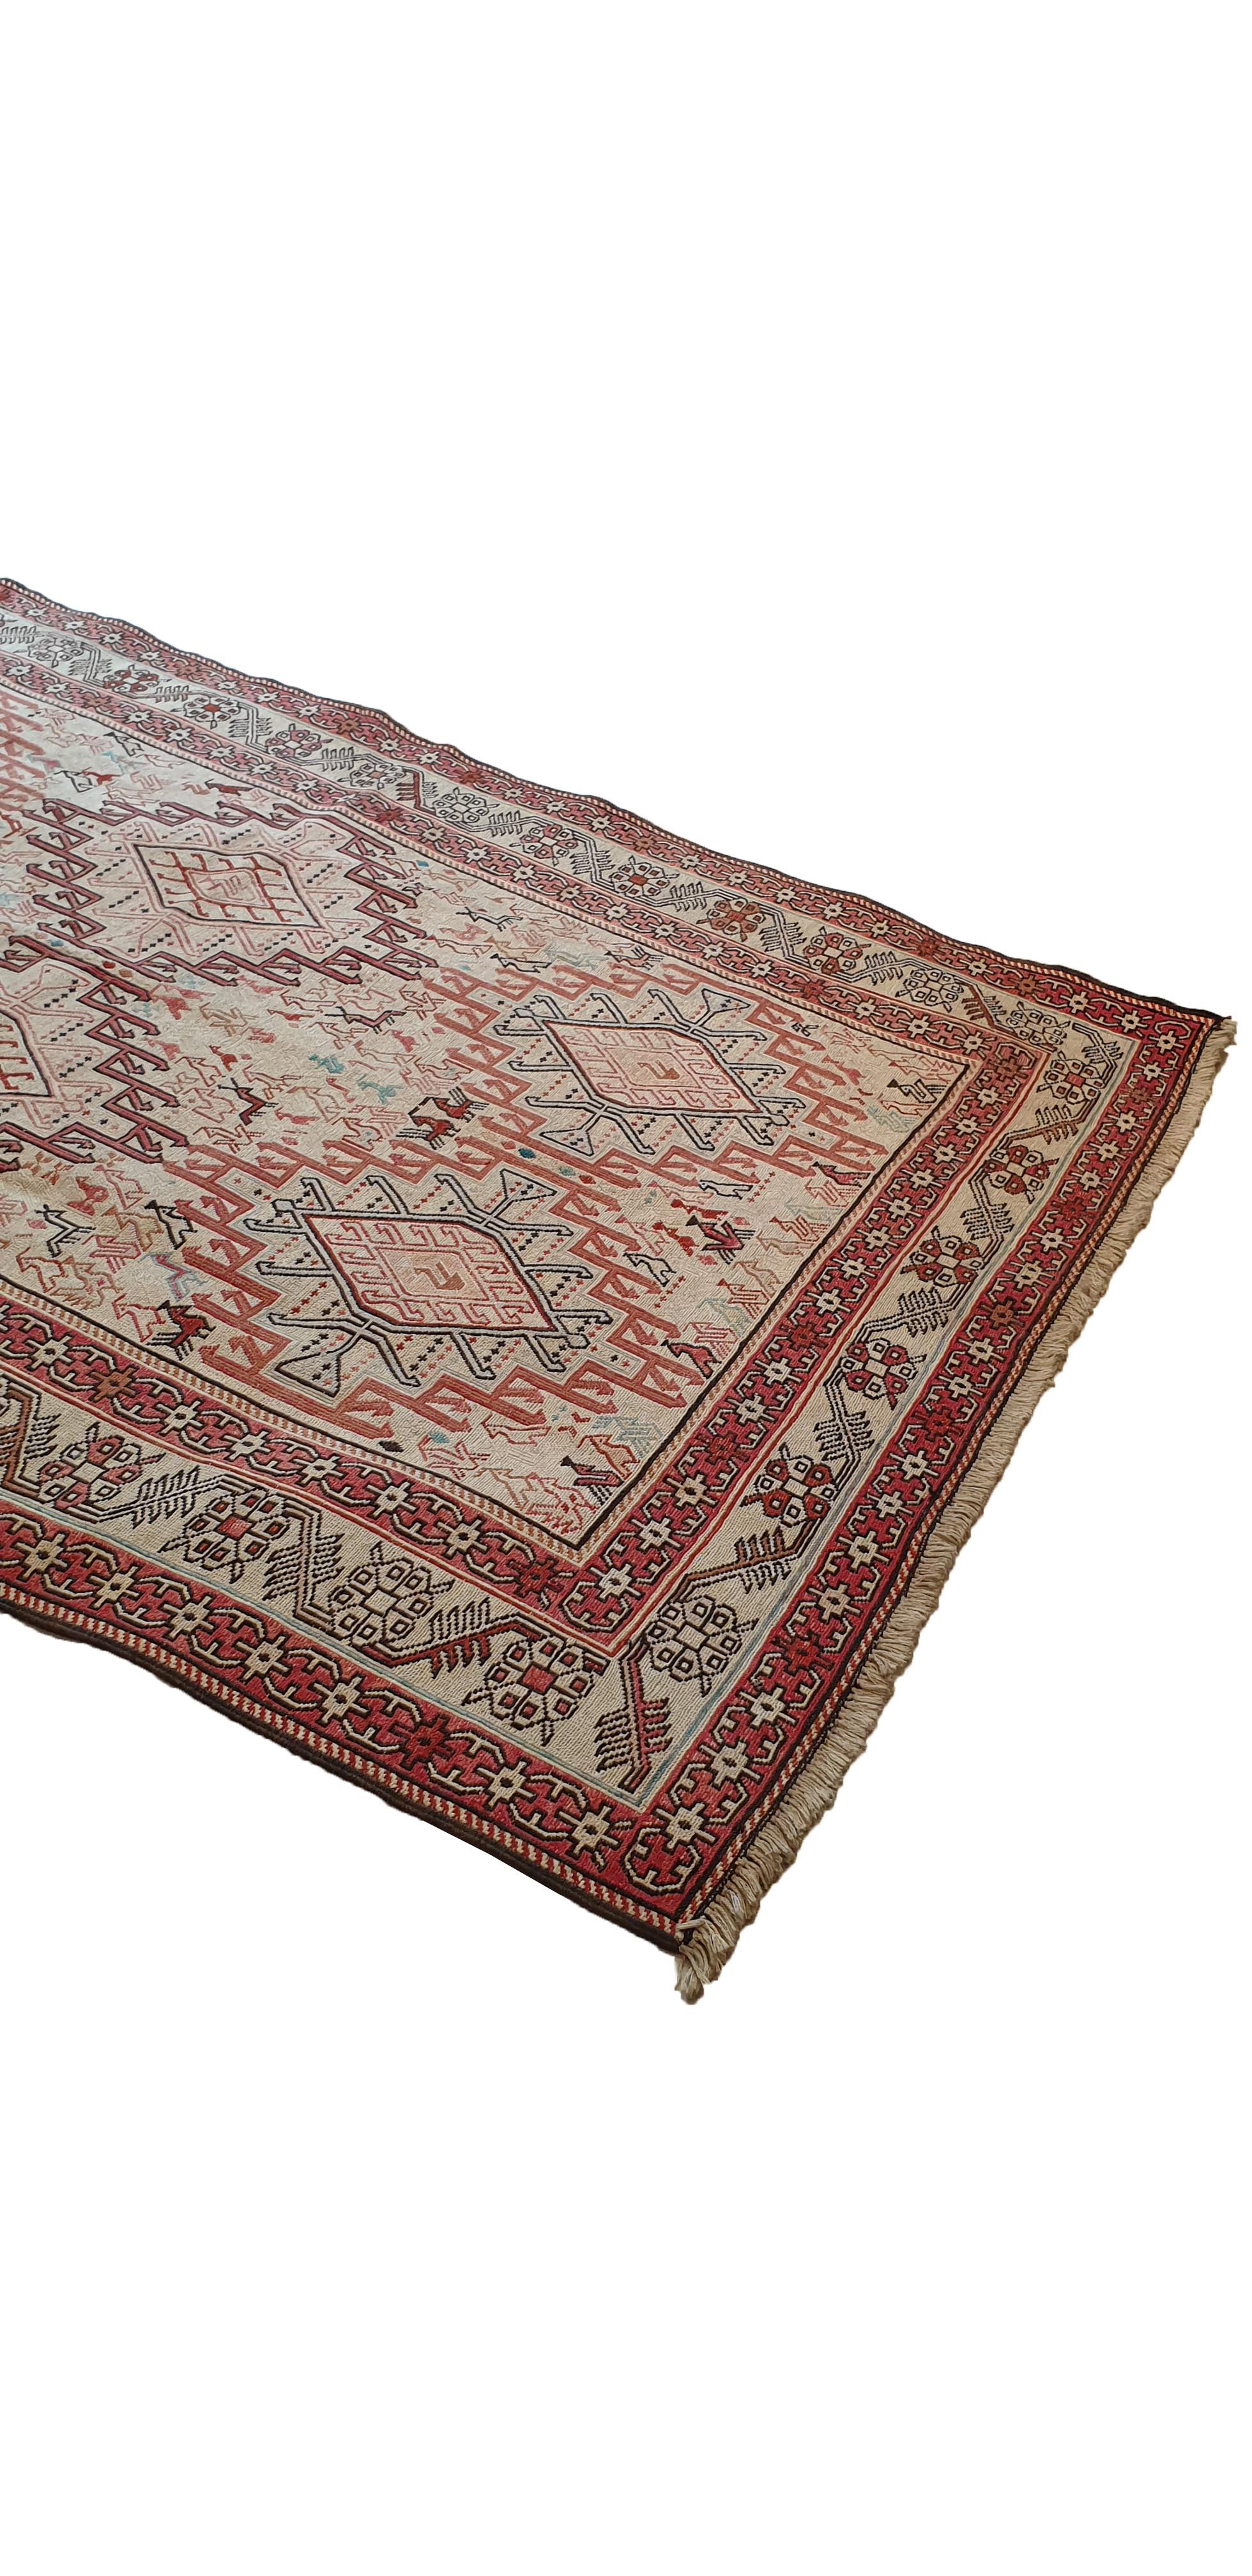 682 - Magnificent Kilim Embroidered with Wool and Silk from the Caucasus For Sale 2